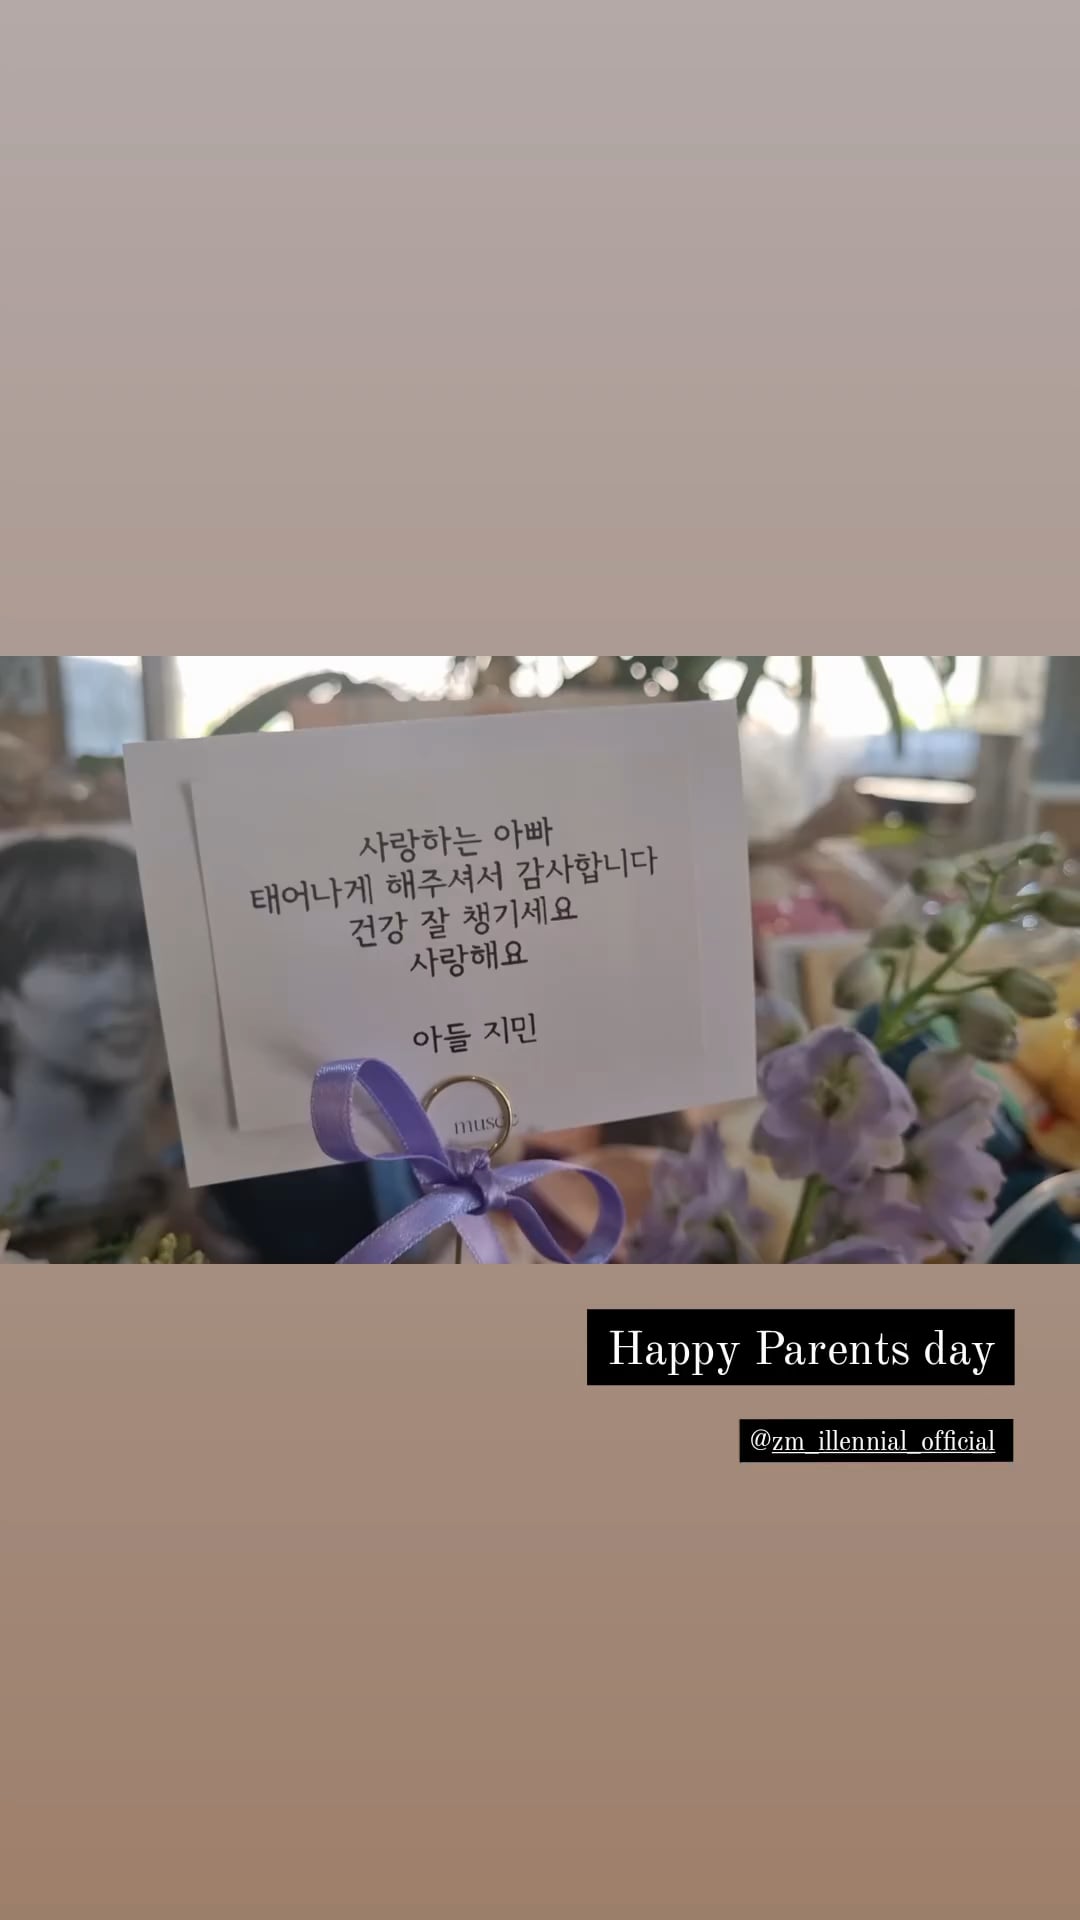 Magnate Cafe (Jimin's dad's cafe) posted a bouquet of flowers Jimin sent for Parents’ Day - 090524